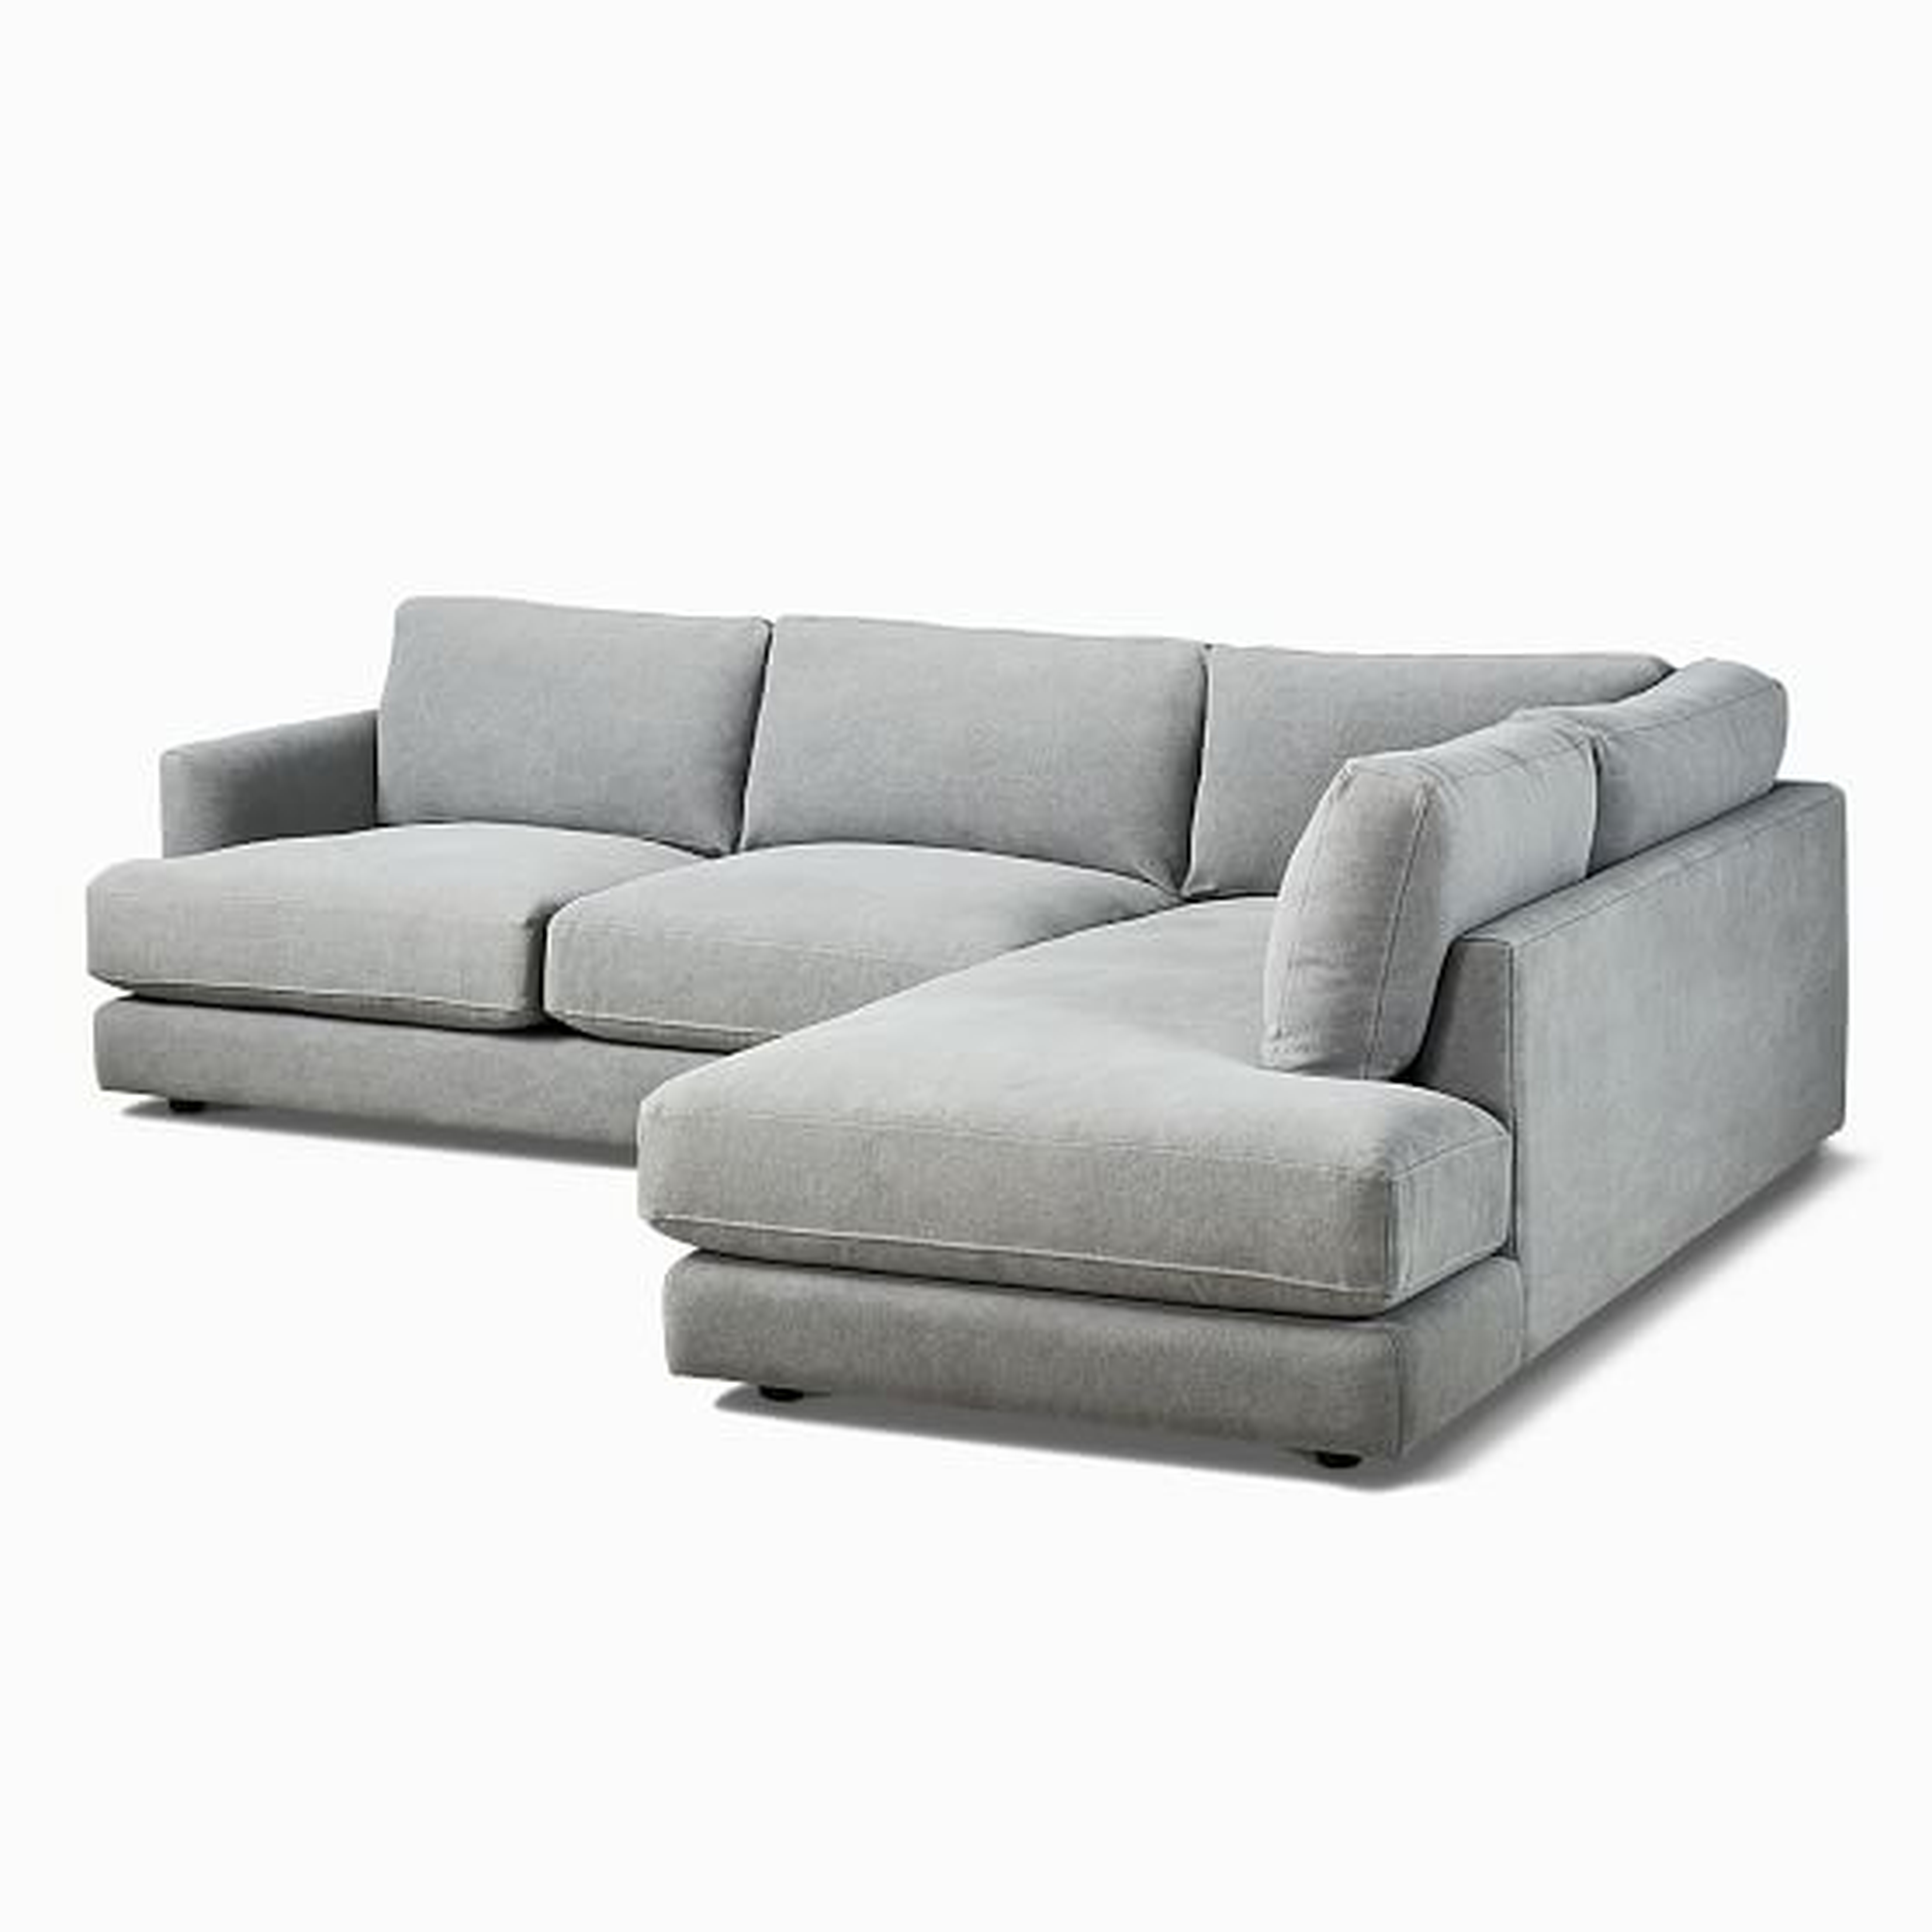 Haven Sectional Set 01: Left Arm Sofa, Right Arm Terminal Chaise, Performance Washed Canvas, Gray - West Elm